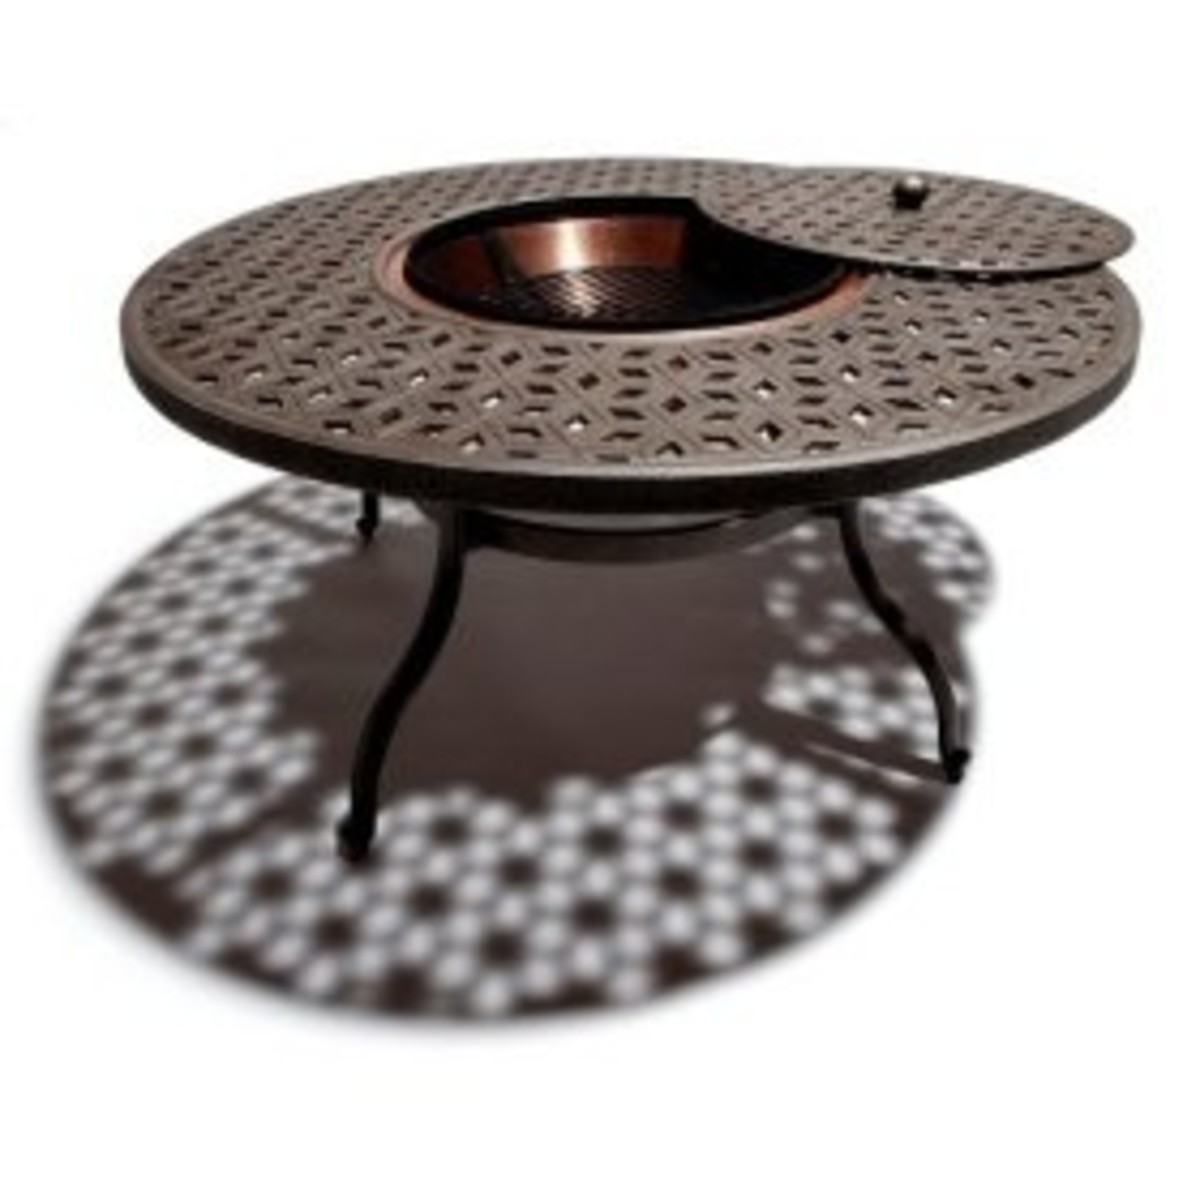 fire-pit-table